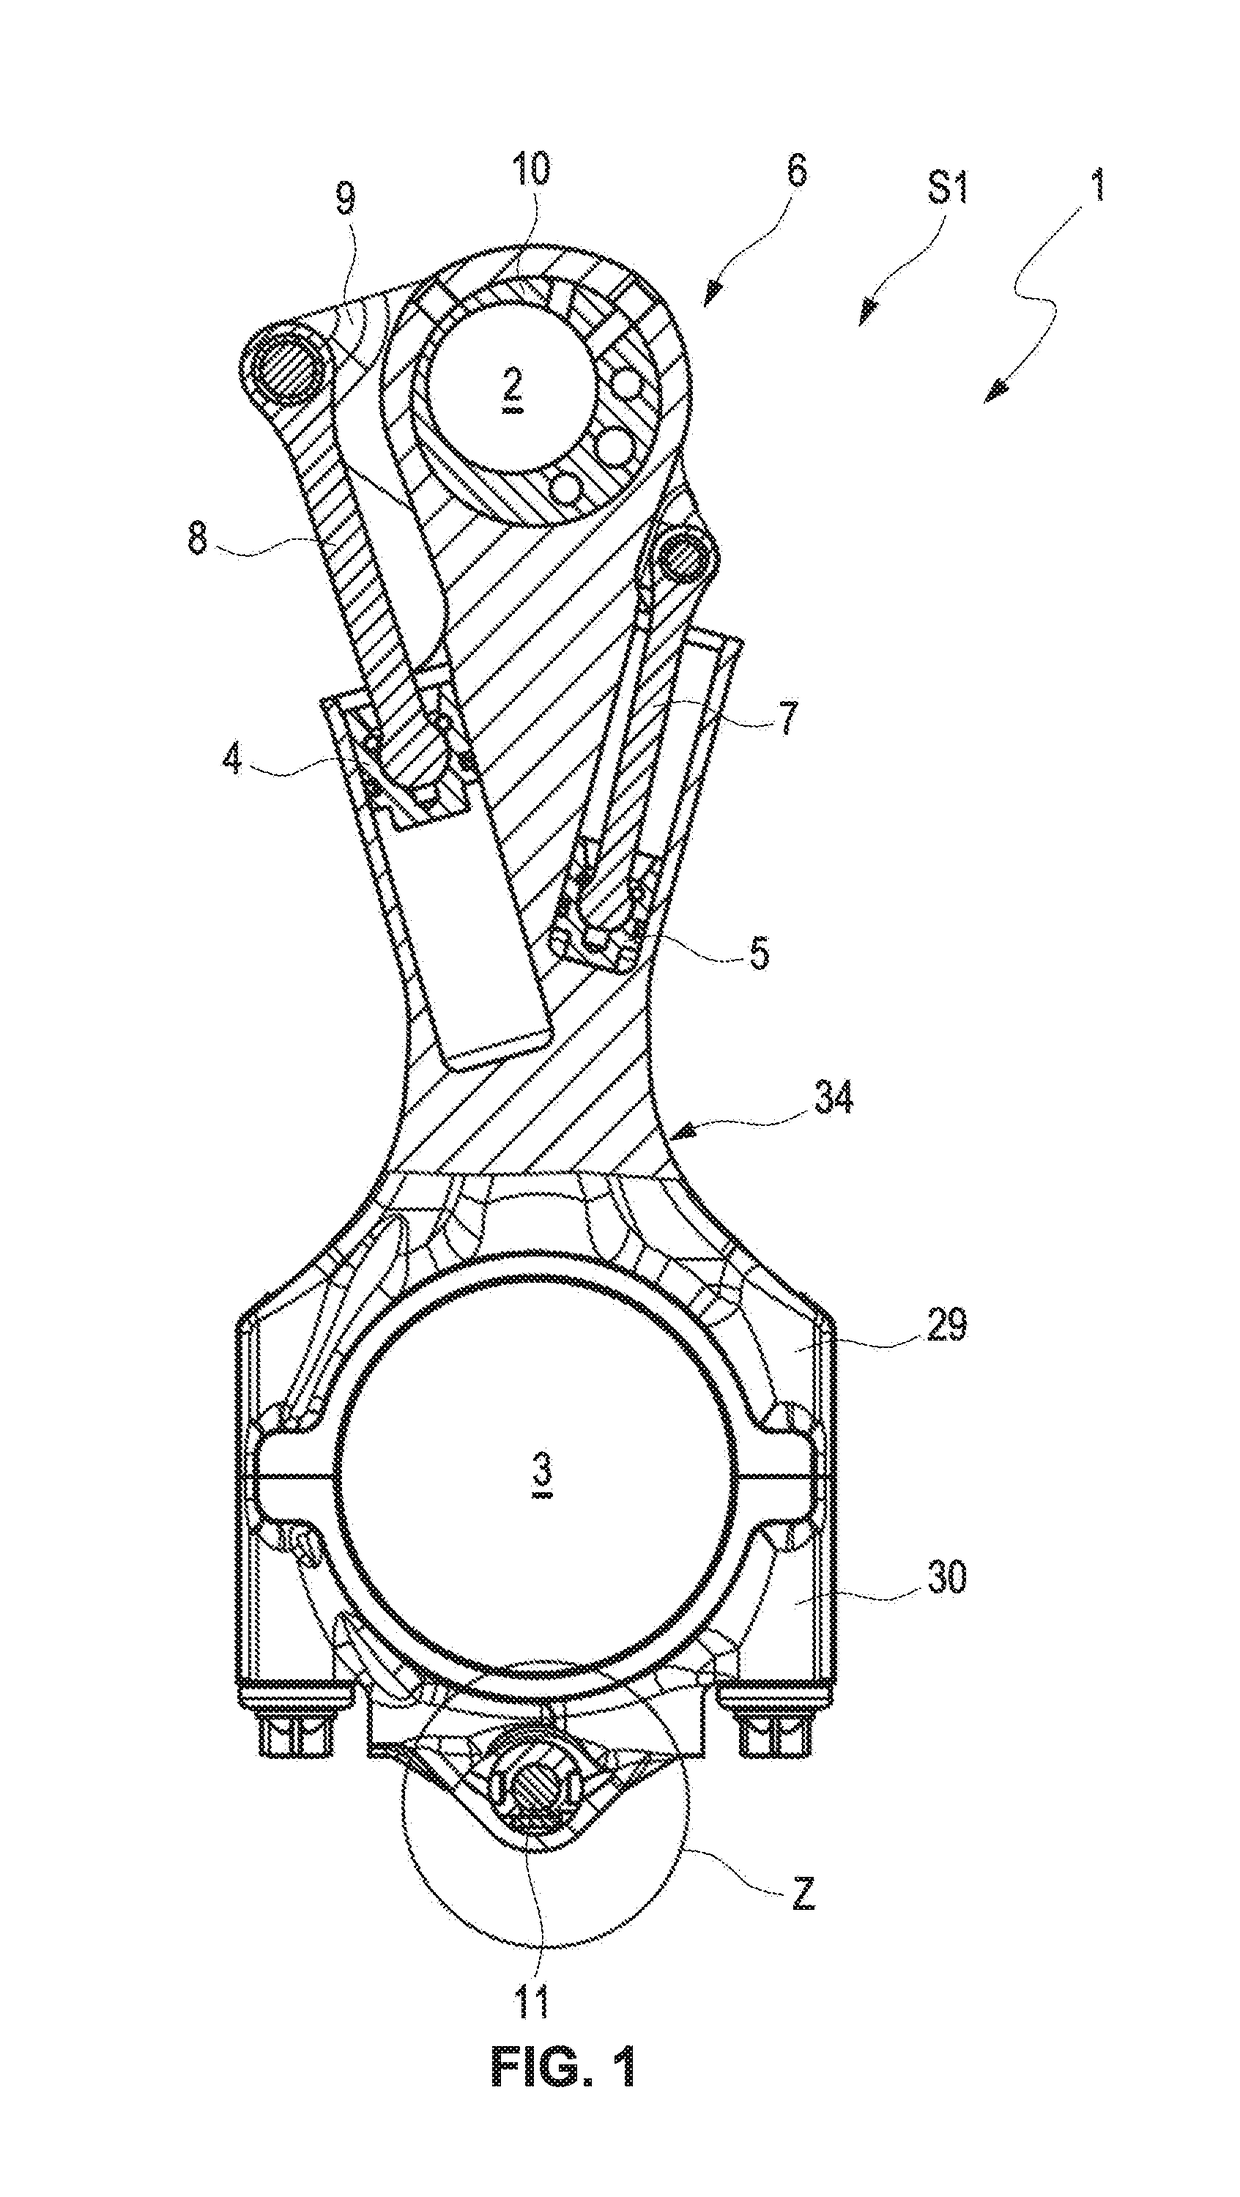 Switch valve for controlling a hydraulic fluid flow and connecting rod for a variable compression internal combustion engine with a switch valve